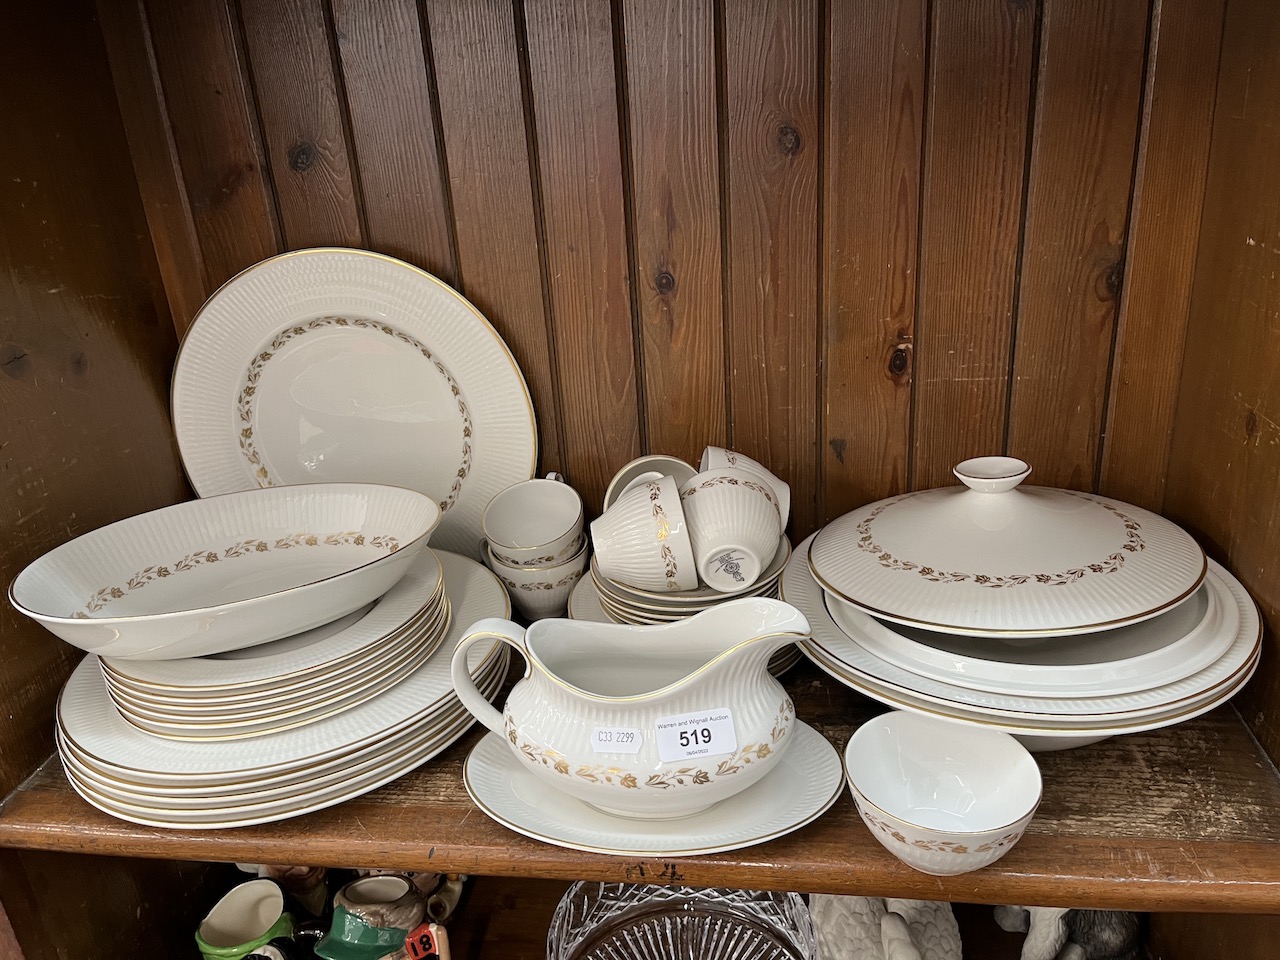 Royal Doulton Fairfax dinner and coffee wares - appx 38 pieces